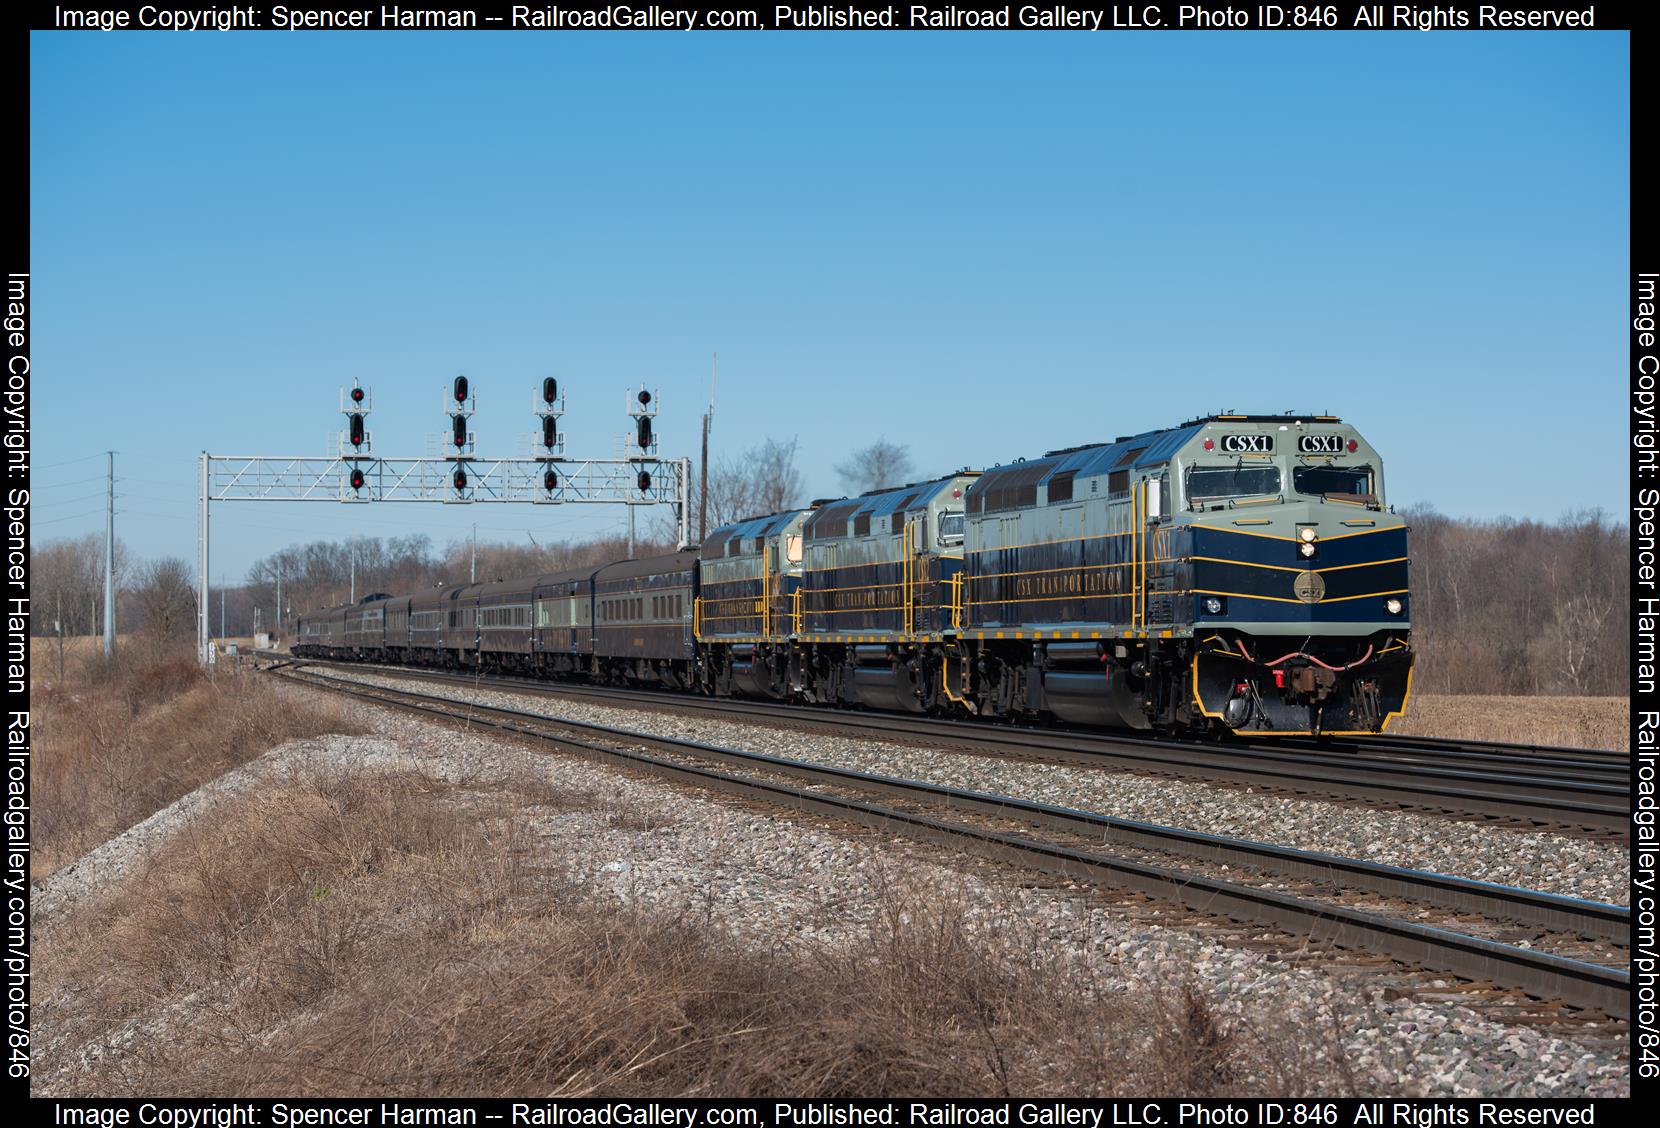 CSXT 1 is a class EMD F40PH and  is pictured in Altona, Indiana, USA.  This was taken along the Garrett Subdivision on the CSX Transportation. Photo Copyright: Spencer Harman uploaded to Railroad Gallery on 03/15/2023. This photograph of CSXT 1 was taken on Wednesday, March 15, 2023. All Rights Reserved. 